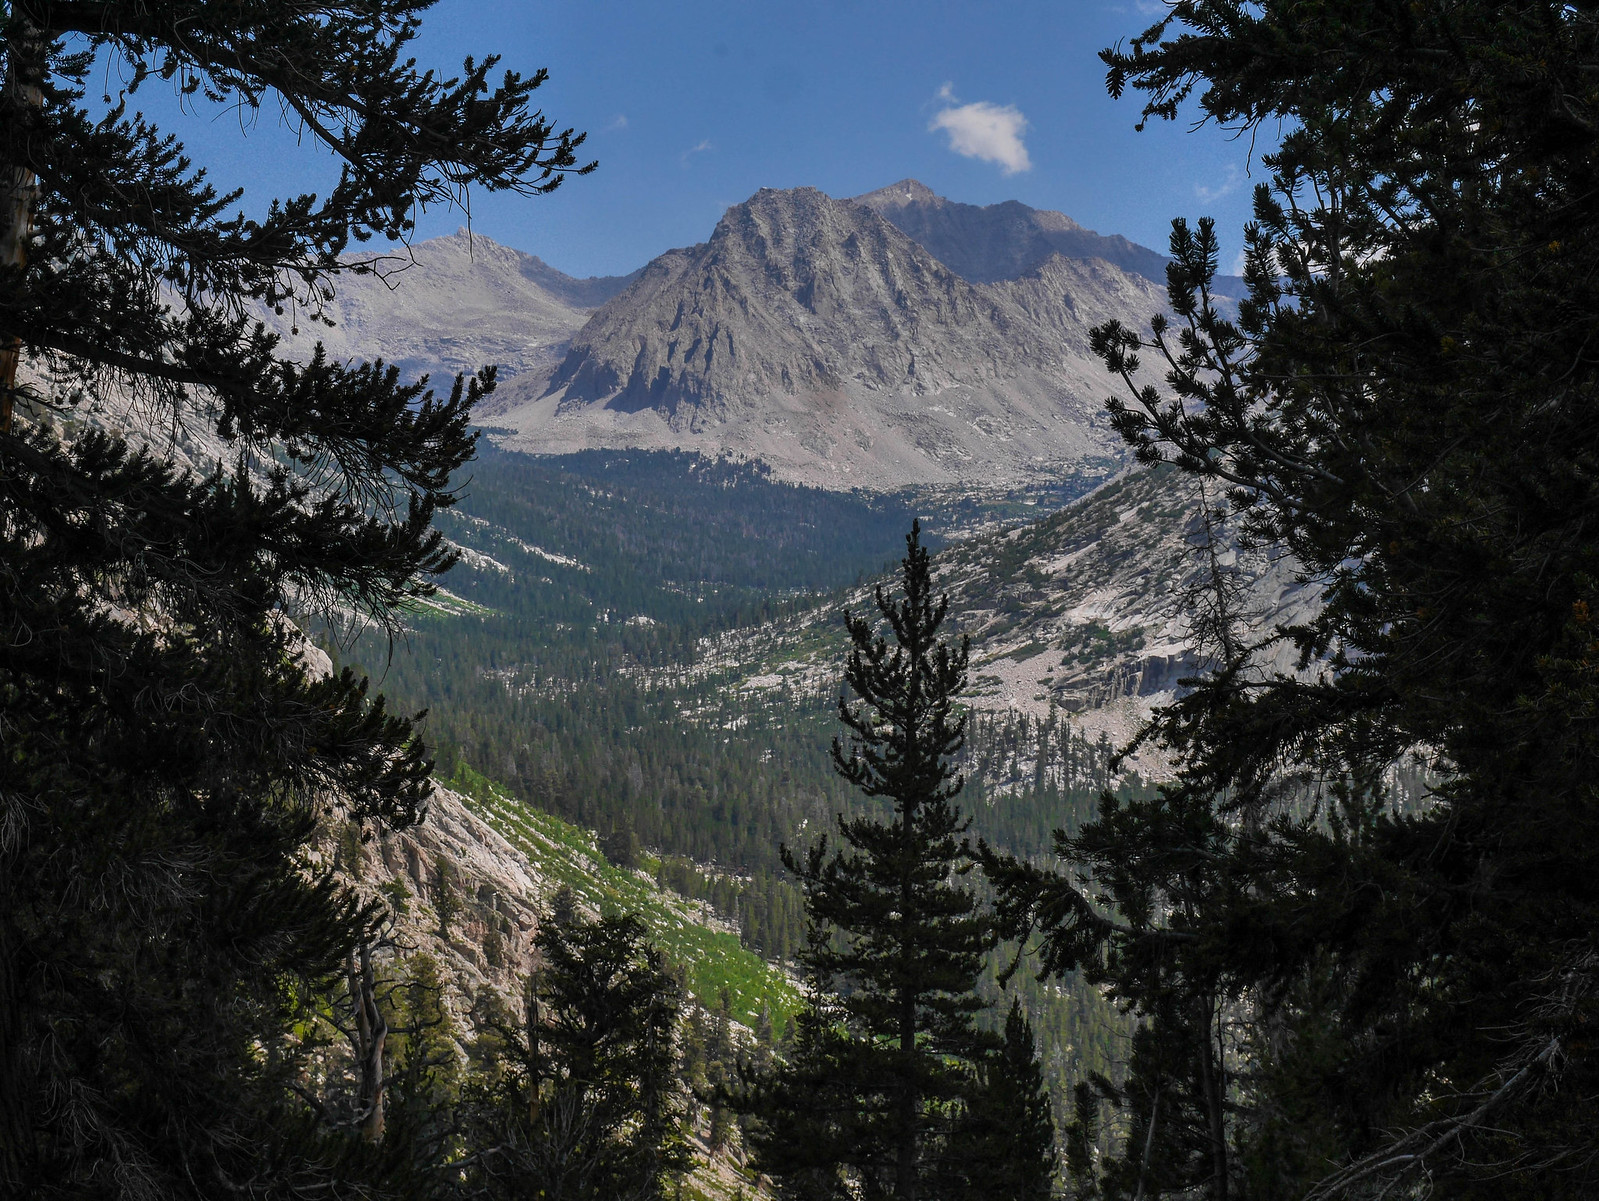 Center Peak with Center Basin on the left and the Forester/Vidette Canyon right and center